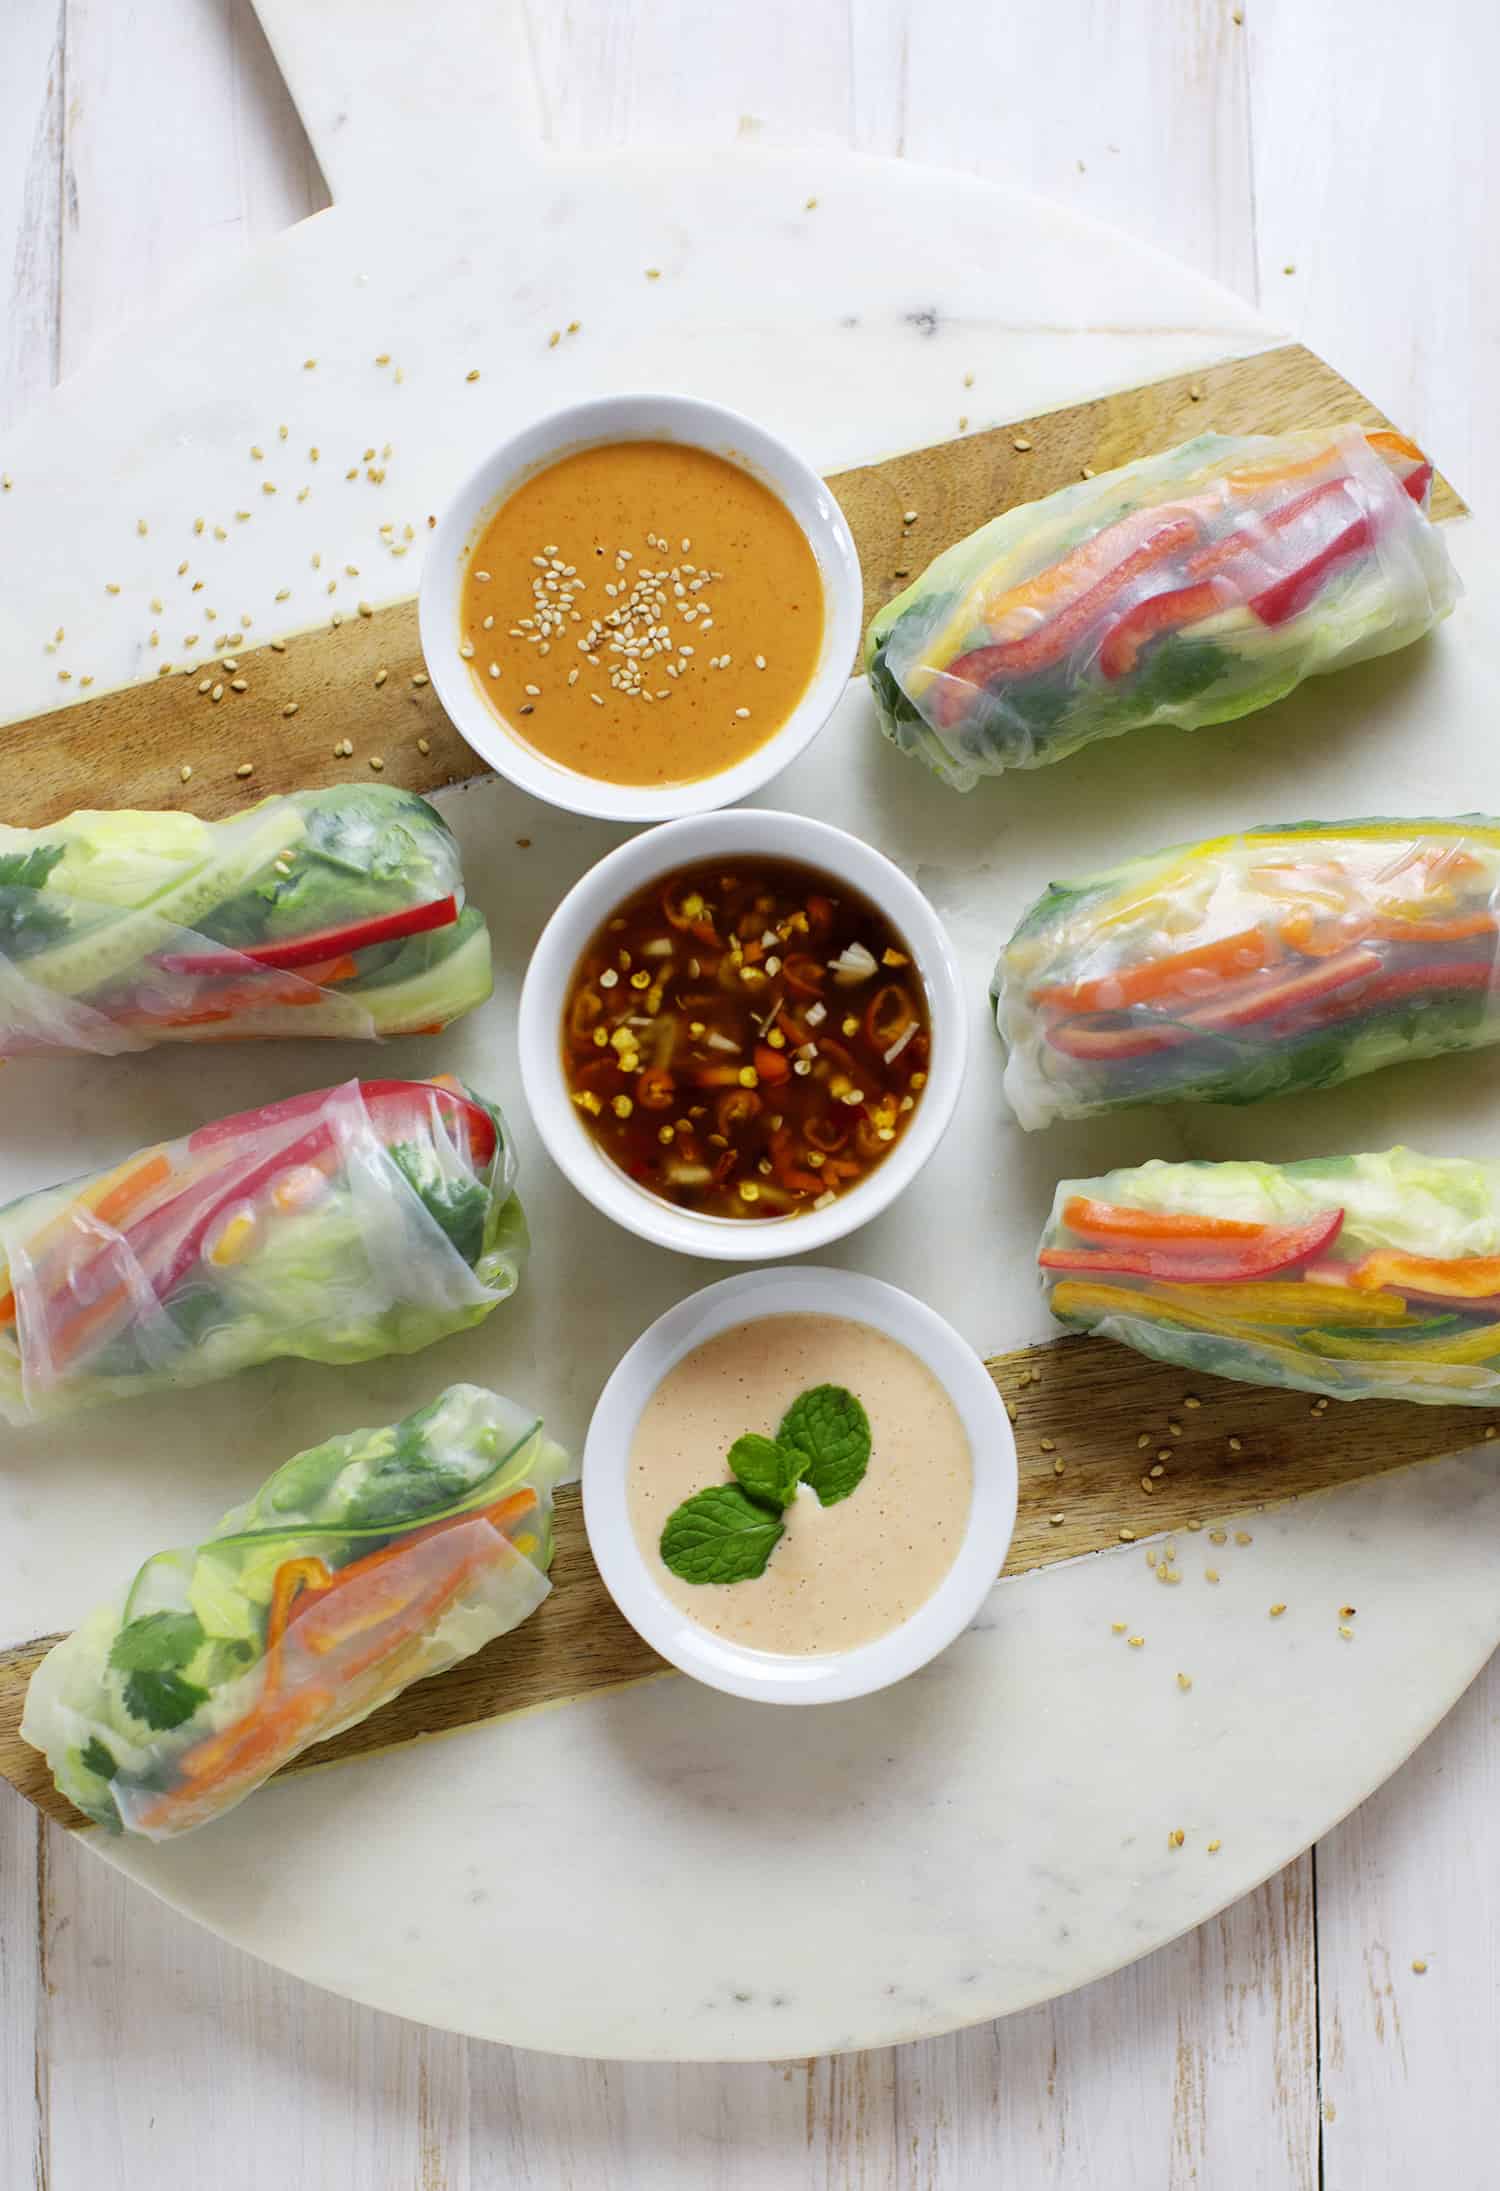 IV. Step-by-Step Guide on Making Homemade Spring Rolls